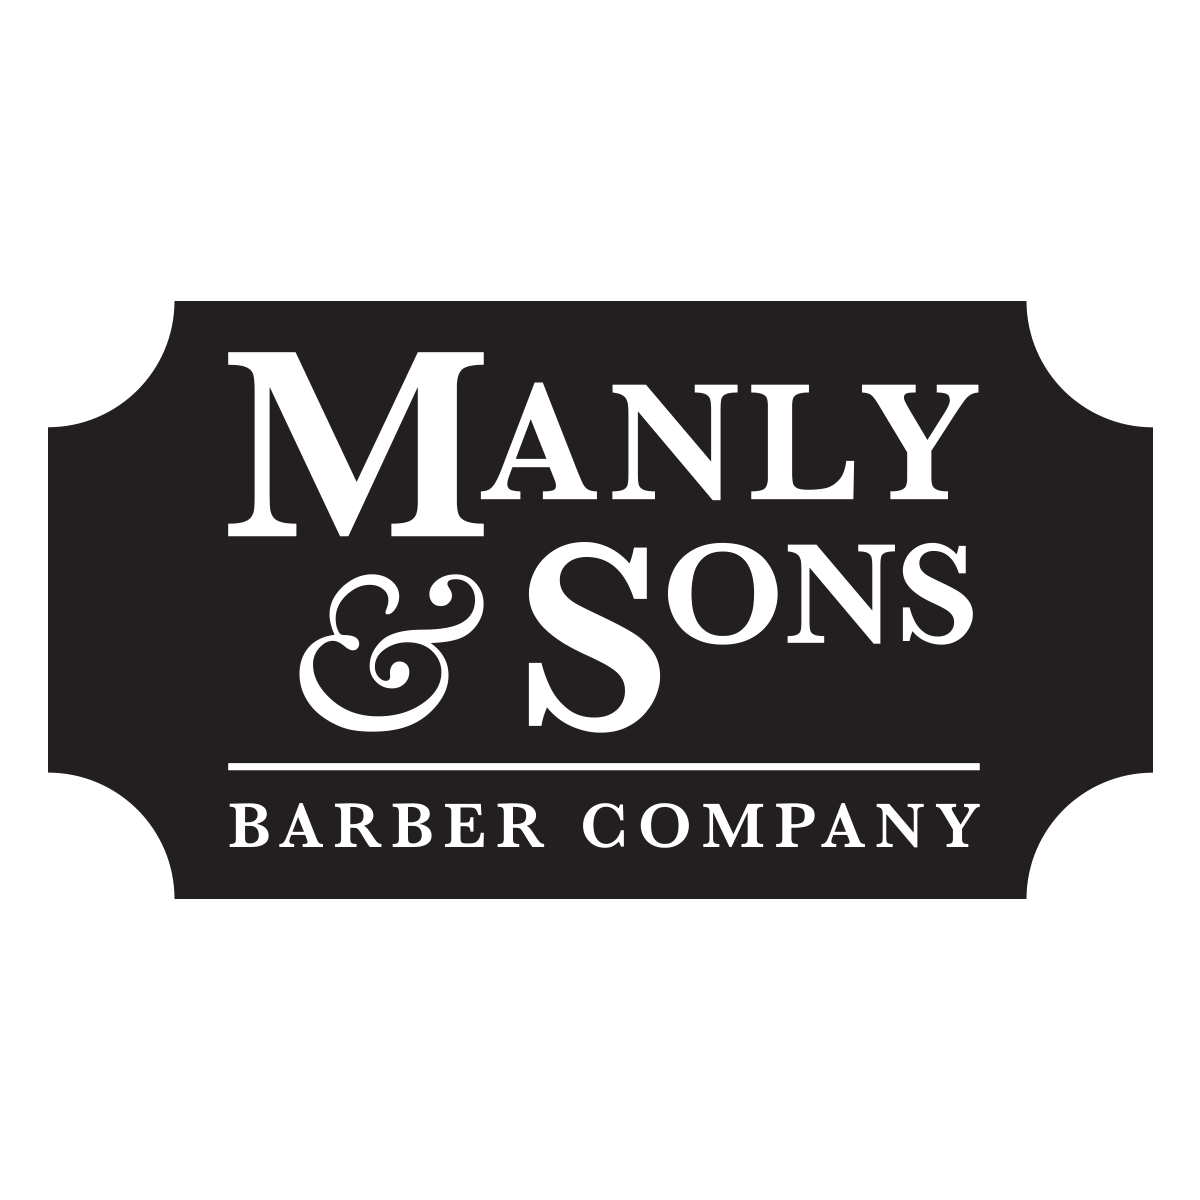 MANLY & SONS Barber Company